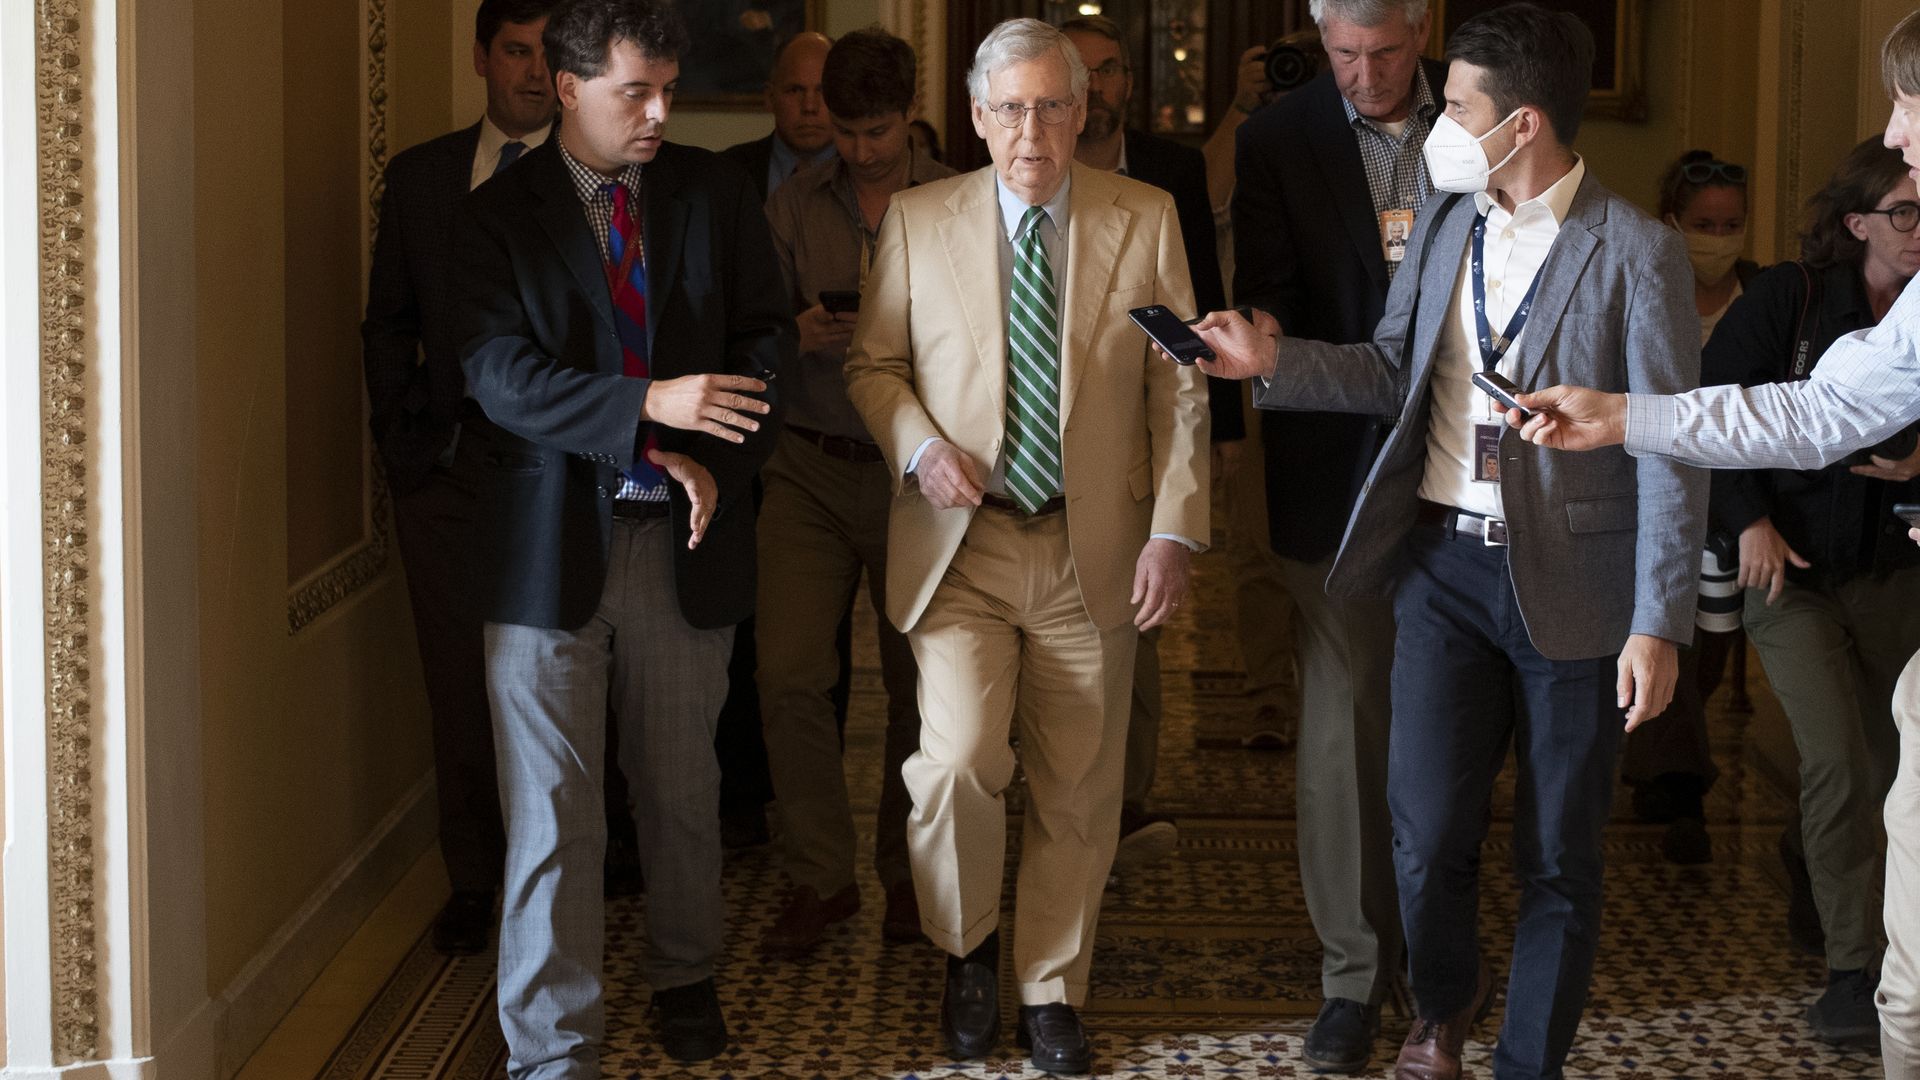 Senate Minority Leader Mitch McConnell is seen speaking with reporters as he walks down a Capitol hallway.